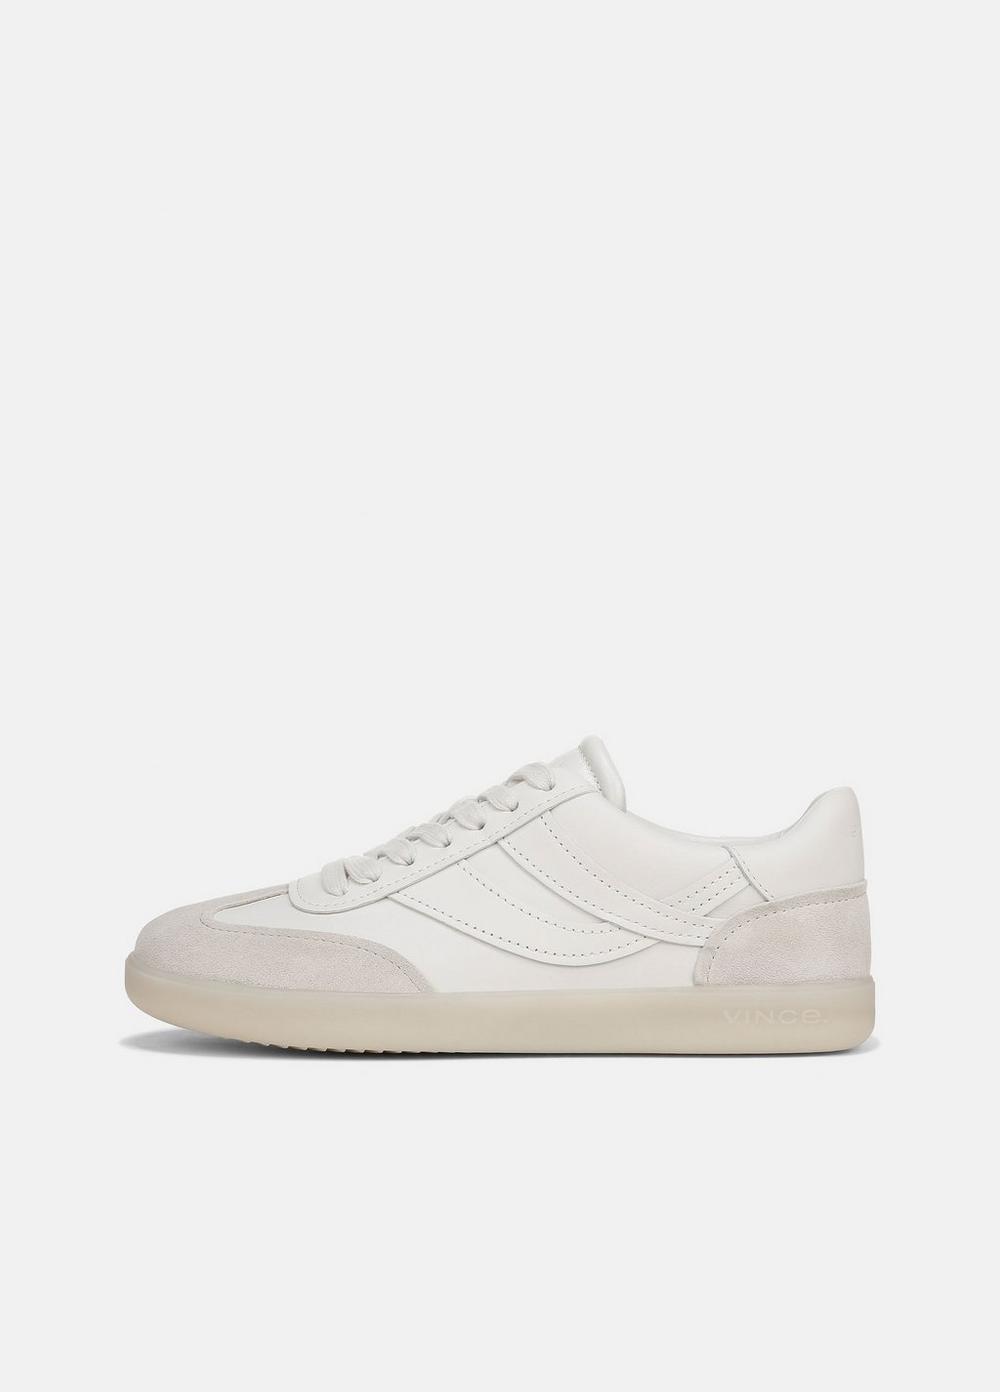 Oasis Leather And Suede Sneaker, Chalk White, Size 7 Vince